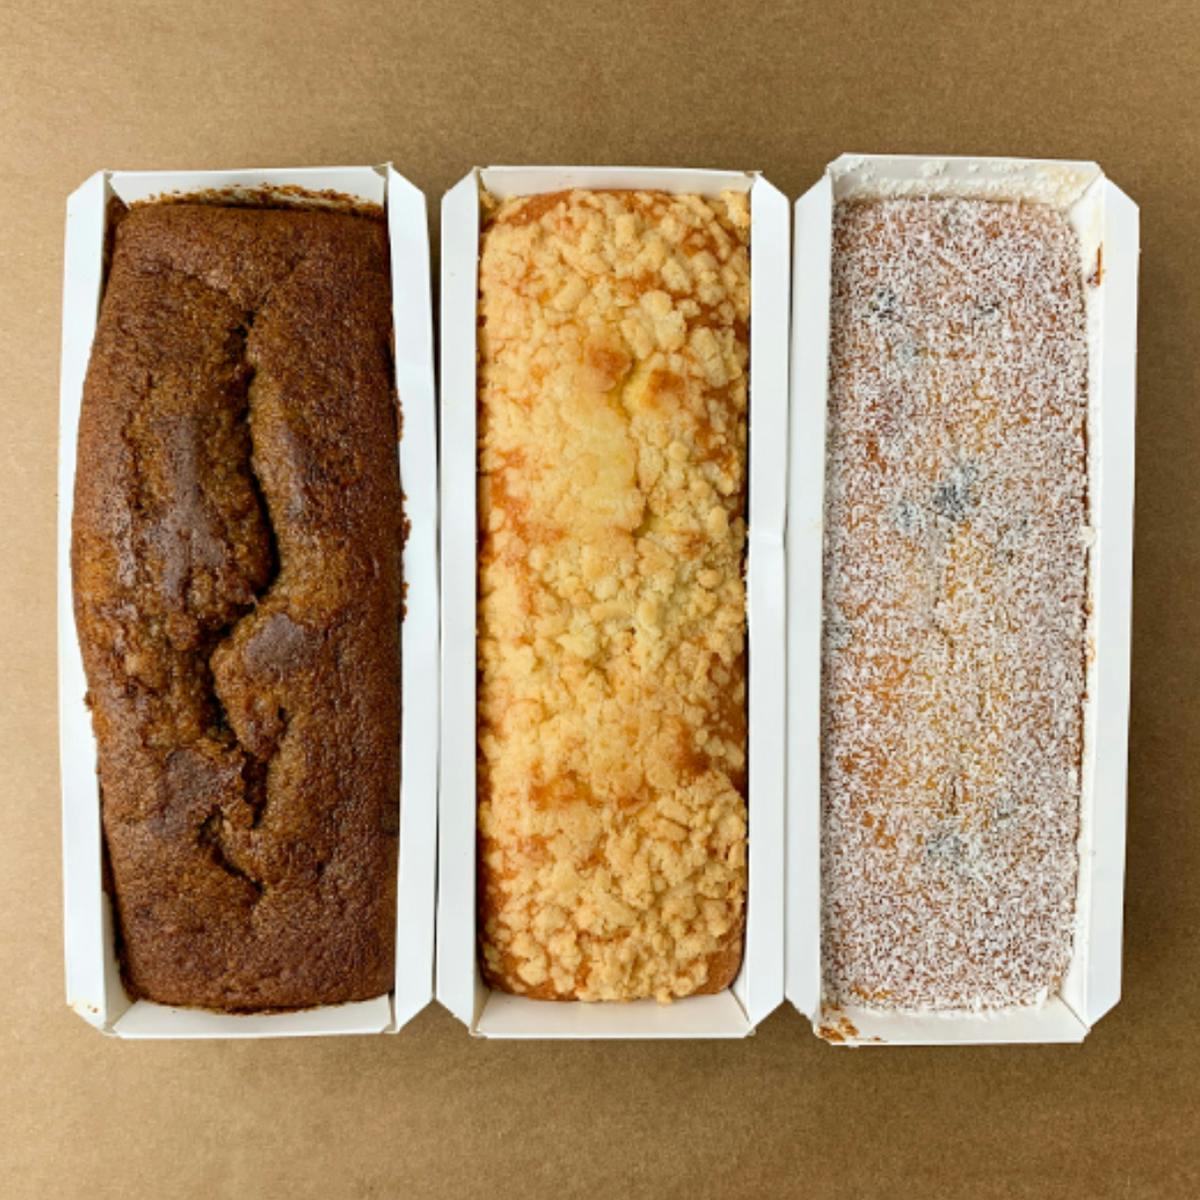 Loaf Cake Combo 3 pack by Breads Bakery Goldbelly